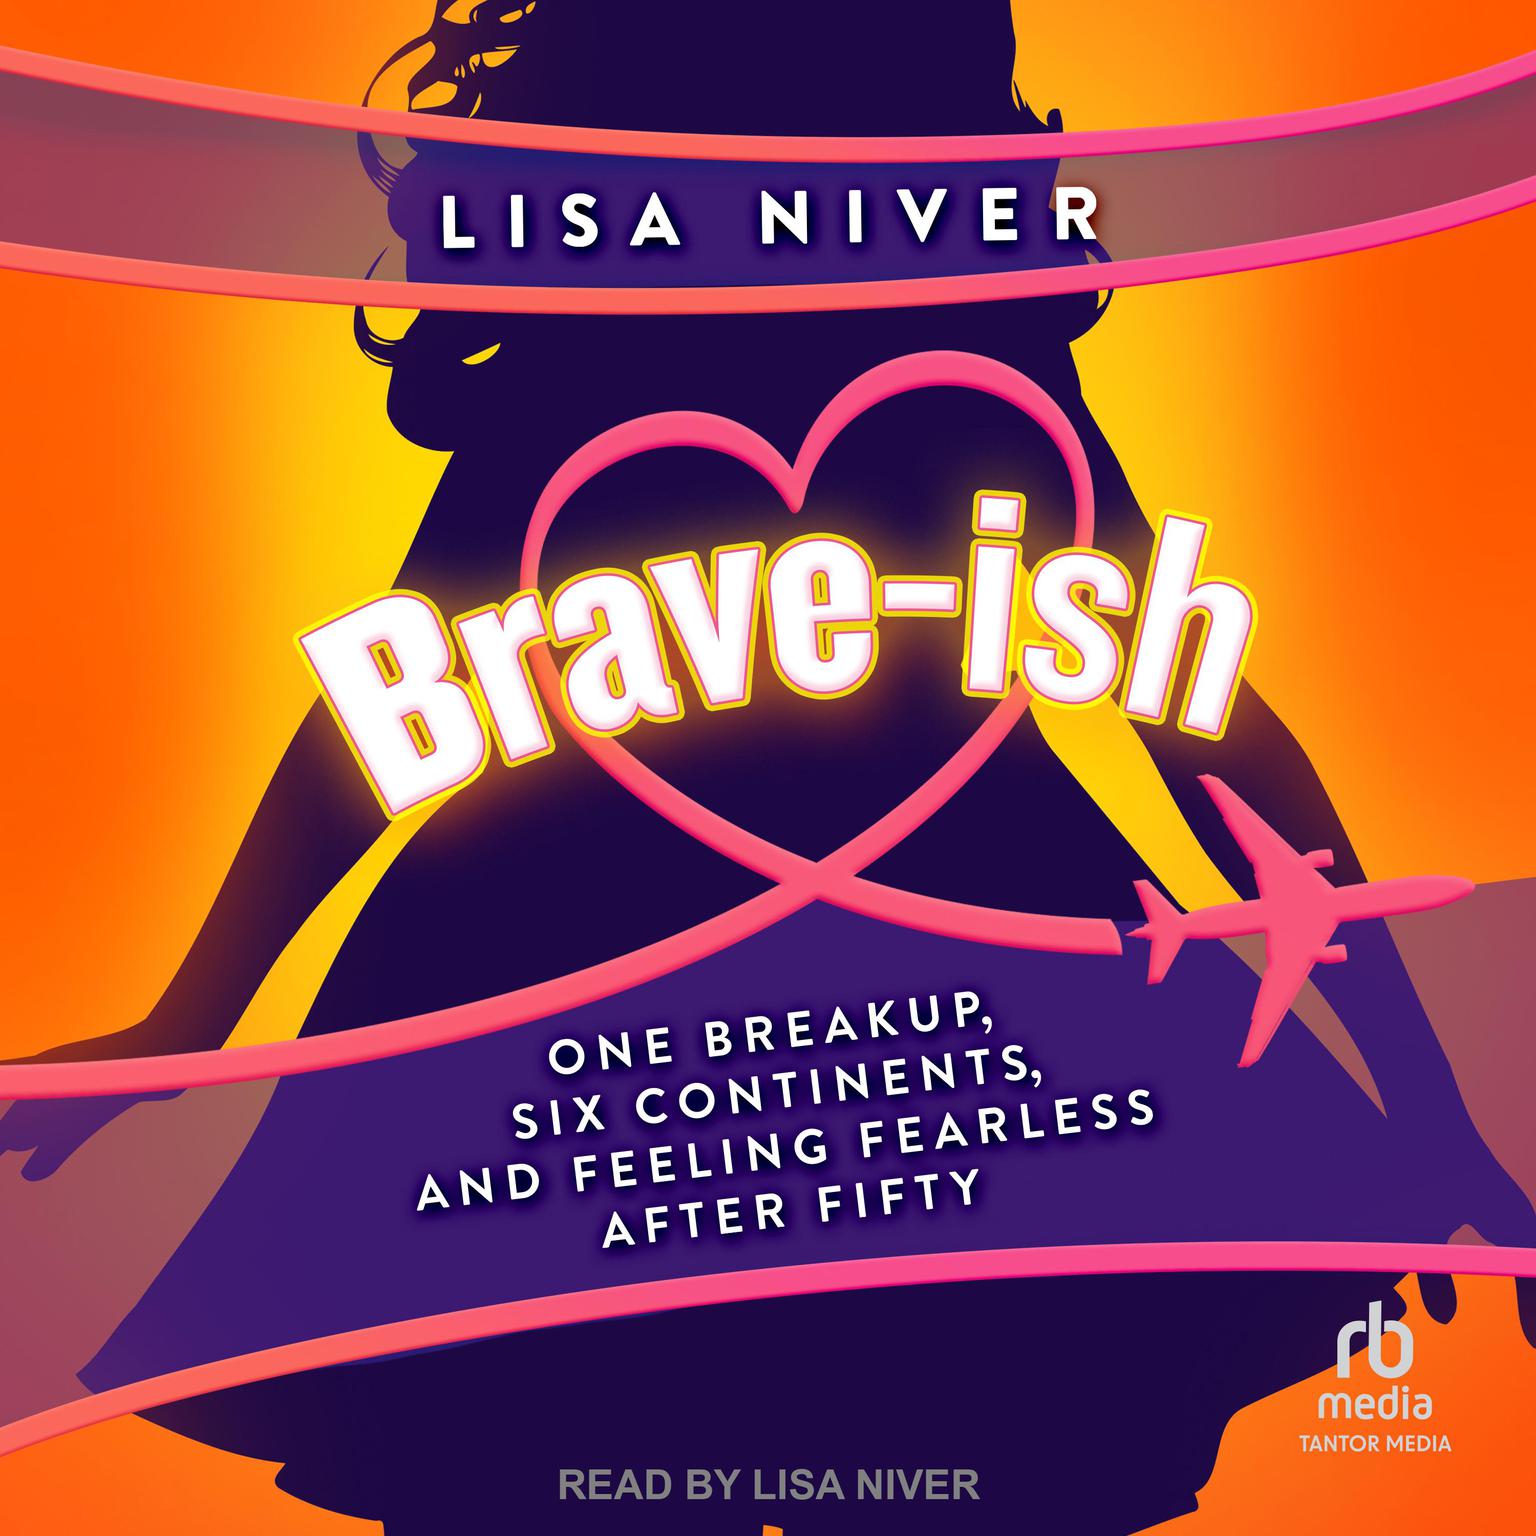 Brave-ish: One Breakup, Six Continents, and Feeling Fearless After Fifty Audiobook, by Lisa Niver